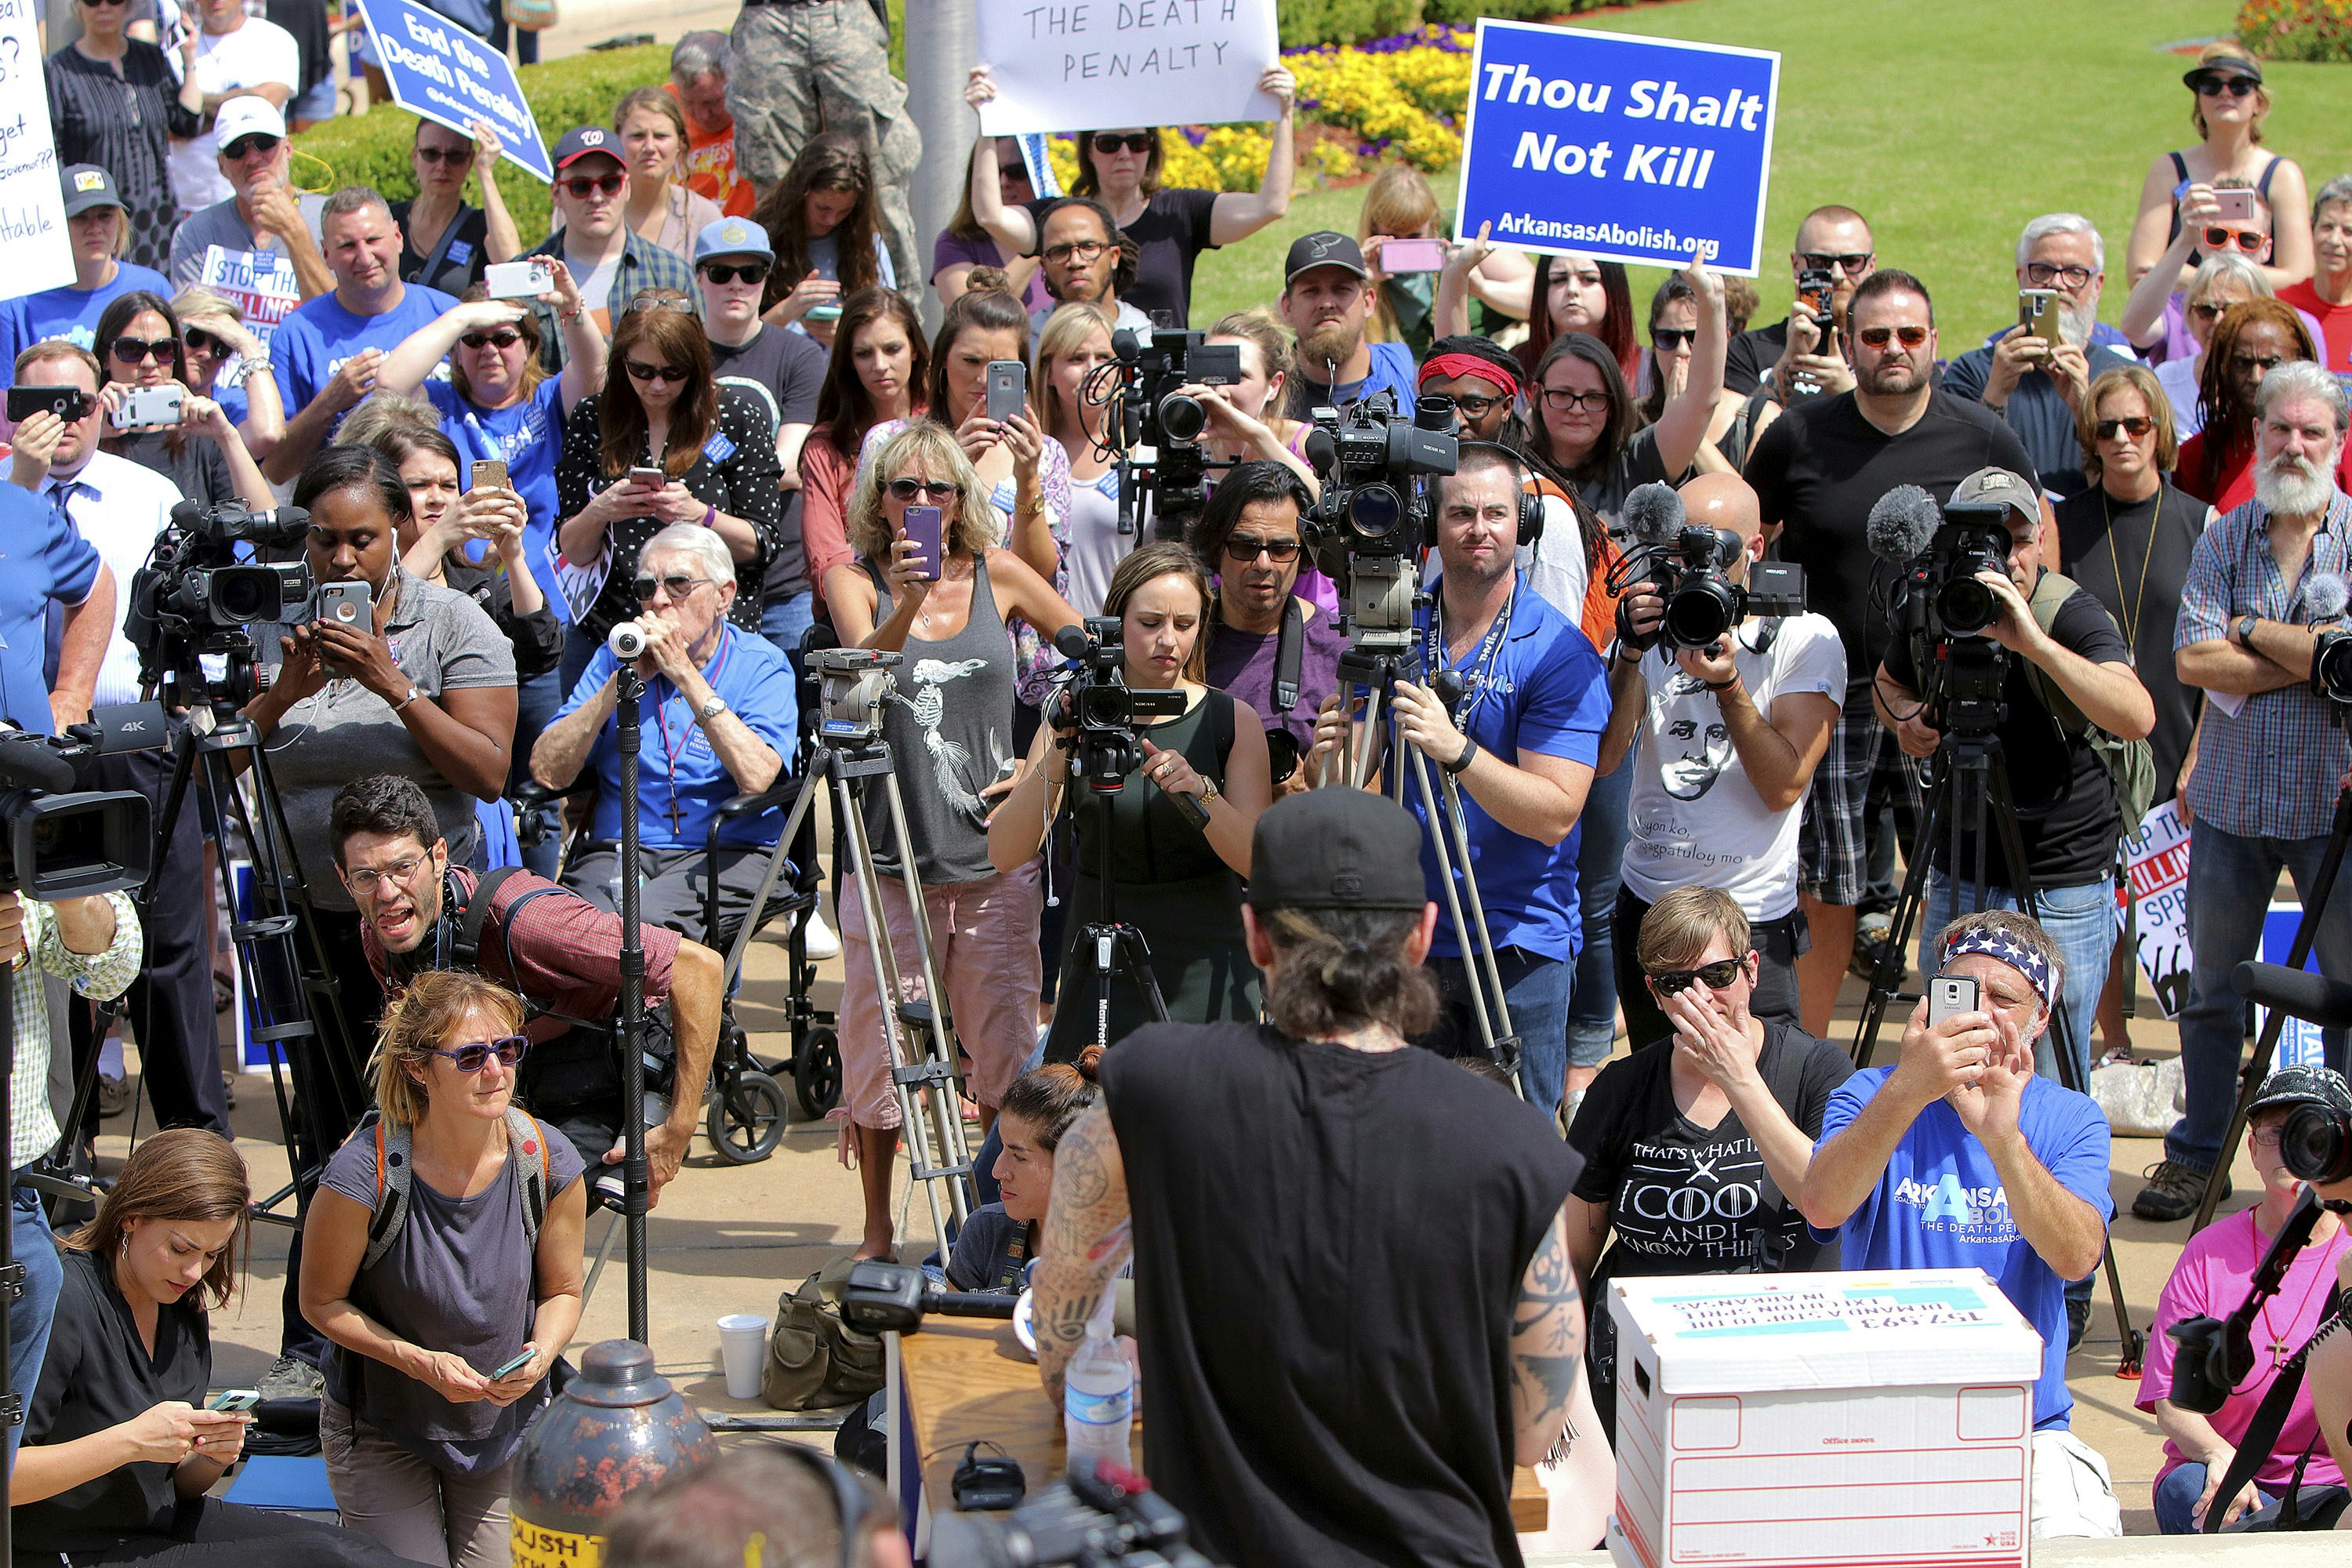 Former Arkansas death row inmate Damien Echols, center, back to camera, speaks at rally opposing the state's upcoming executions, on the front steps of Arkansas' Capitol, Friday, April 14, 2017, in Little Rock, Ark. (Stephen B. Thornton/The Arkansas Democrat-Gazette via AP)